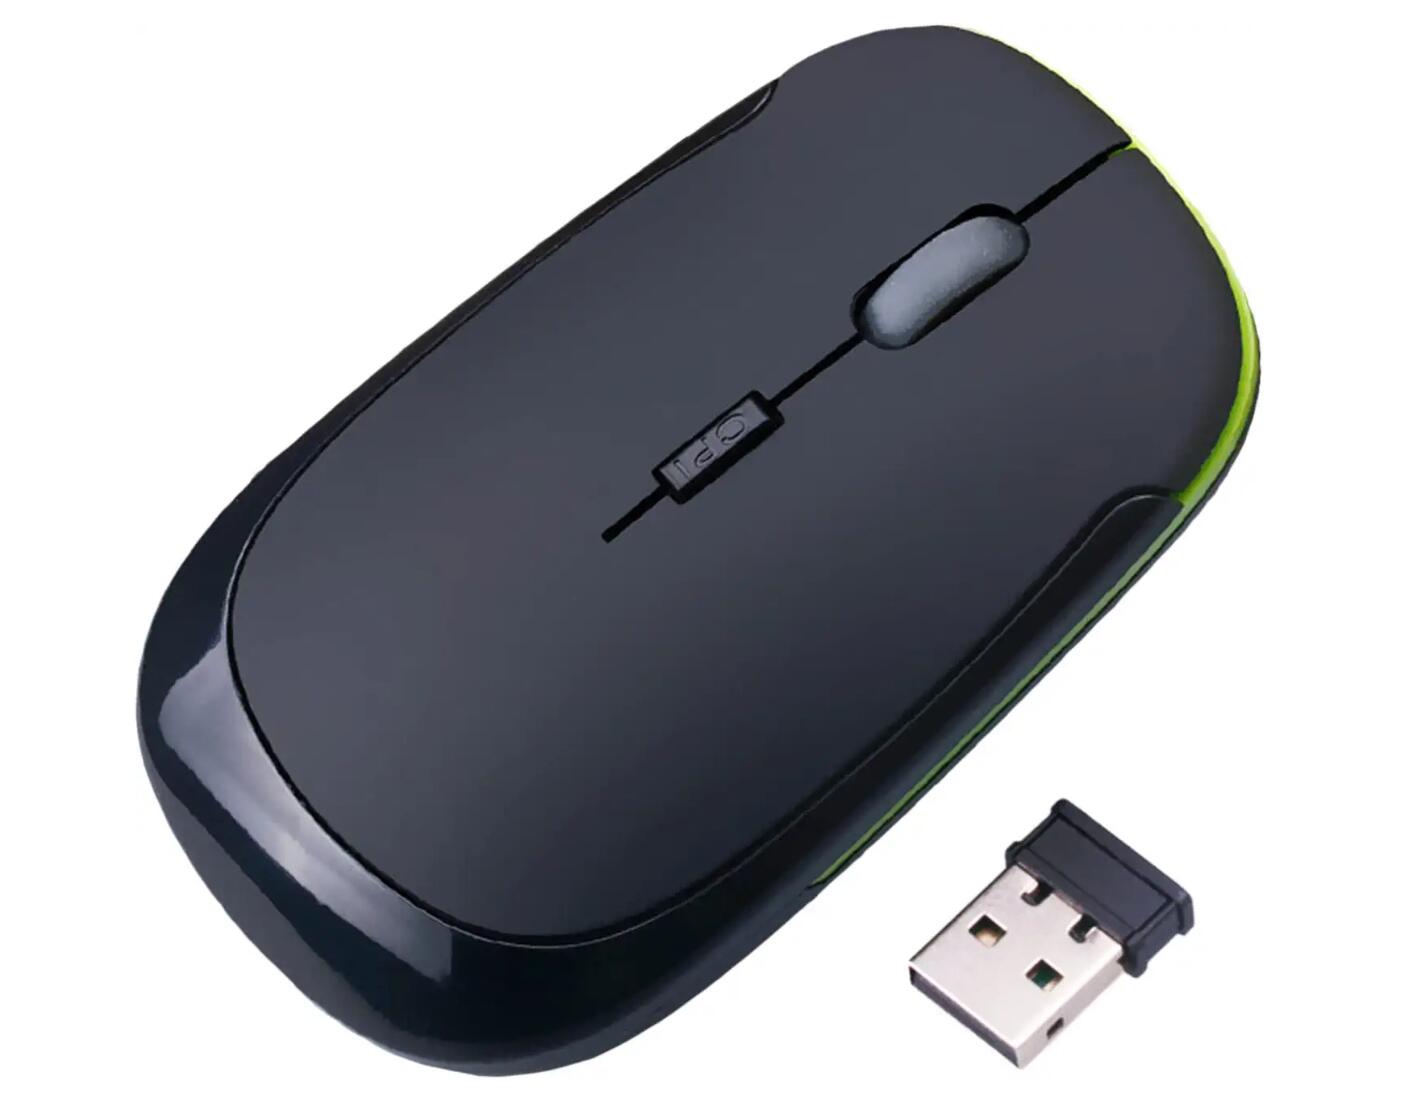 JINHEZO for Computer Laptop Mouse Wireless, 2.4G Portable USB Optical Wireless Slim Computer Mice with USB Nano Receiver, Compatible with Win XP, 8, 9, 10, 11, etc (Black)